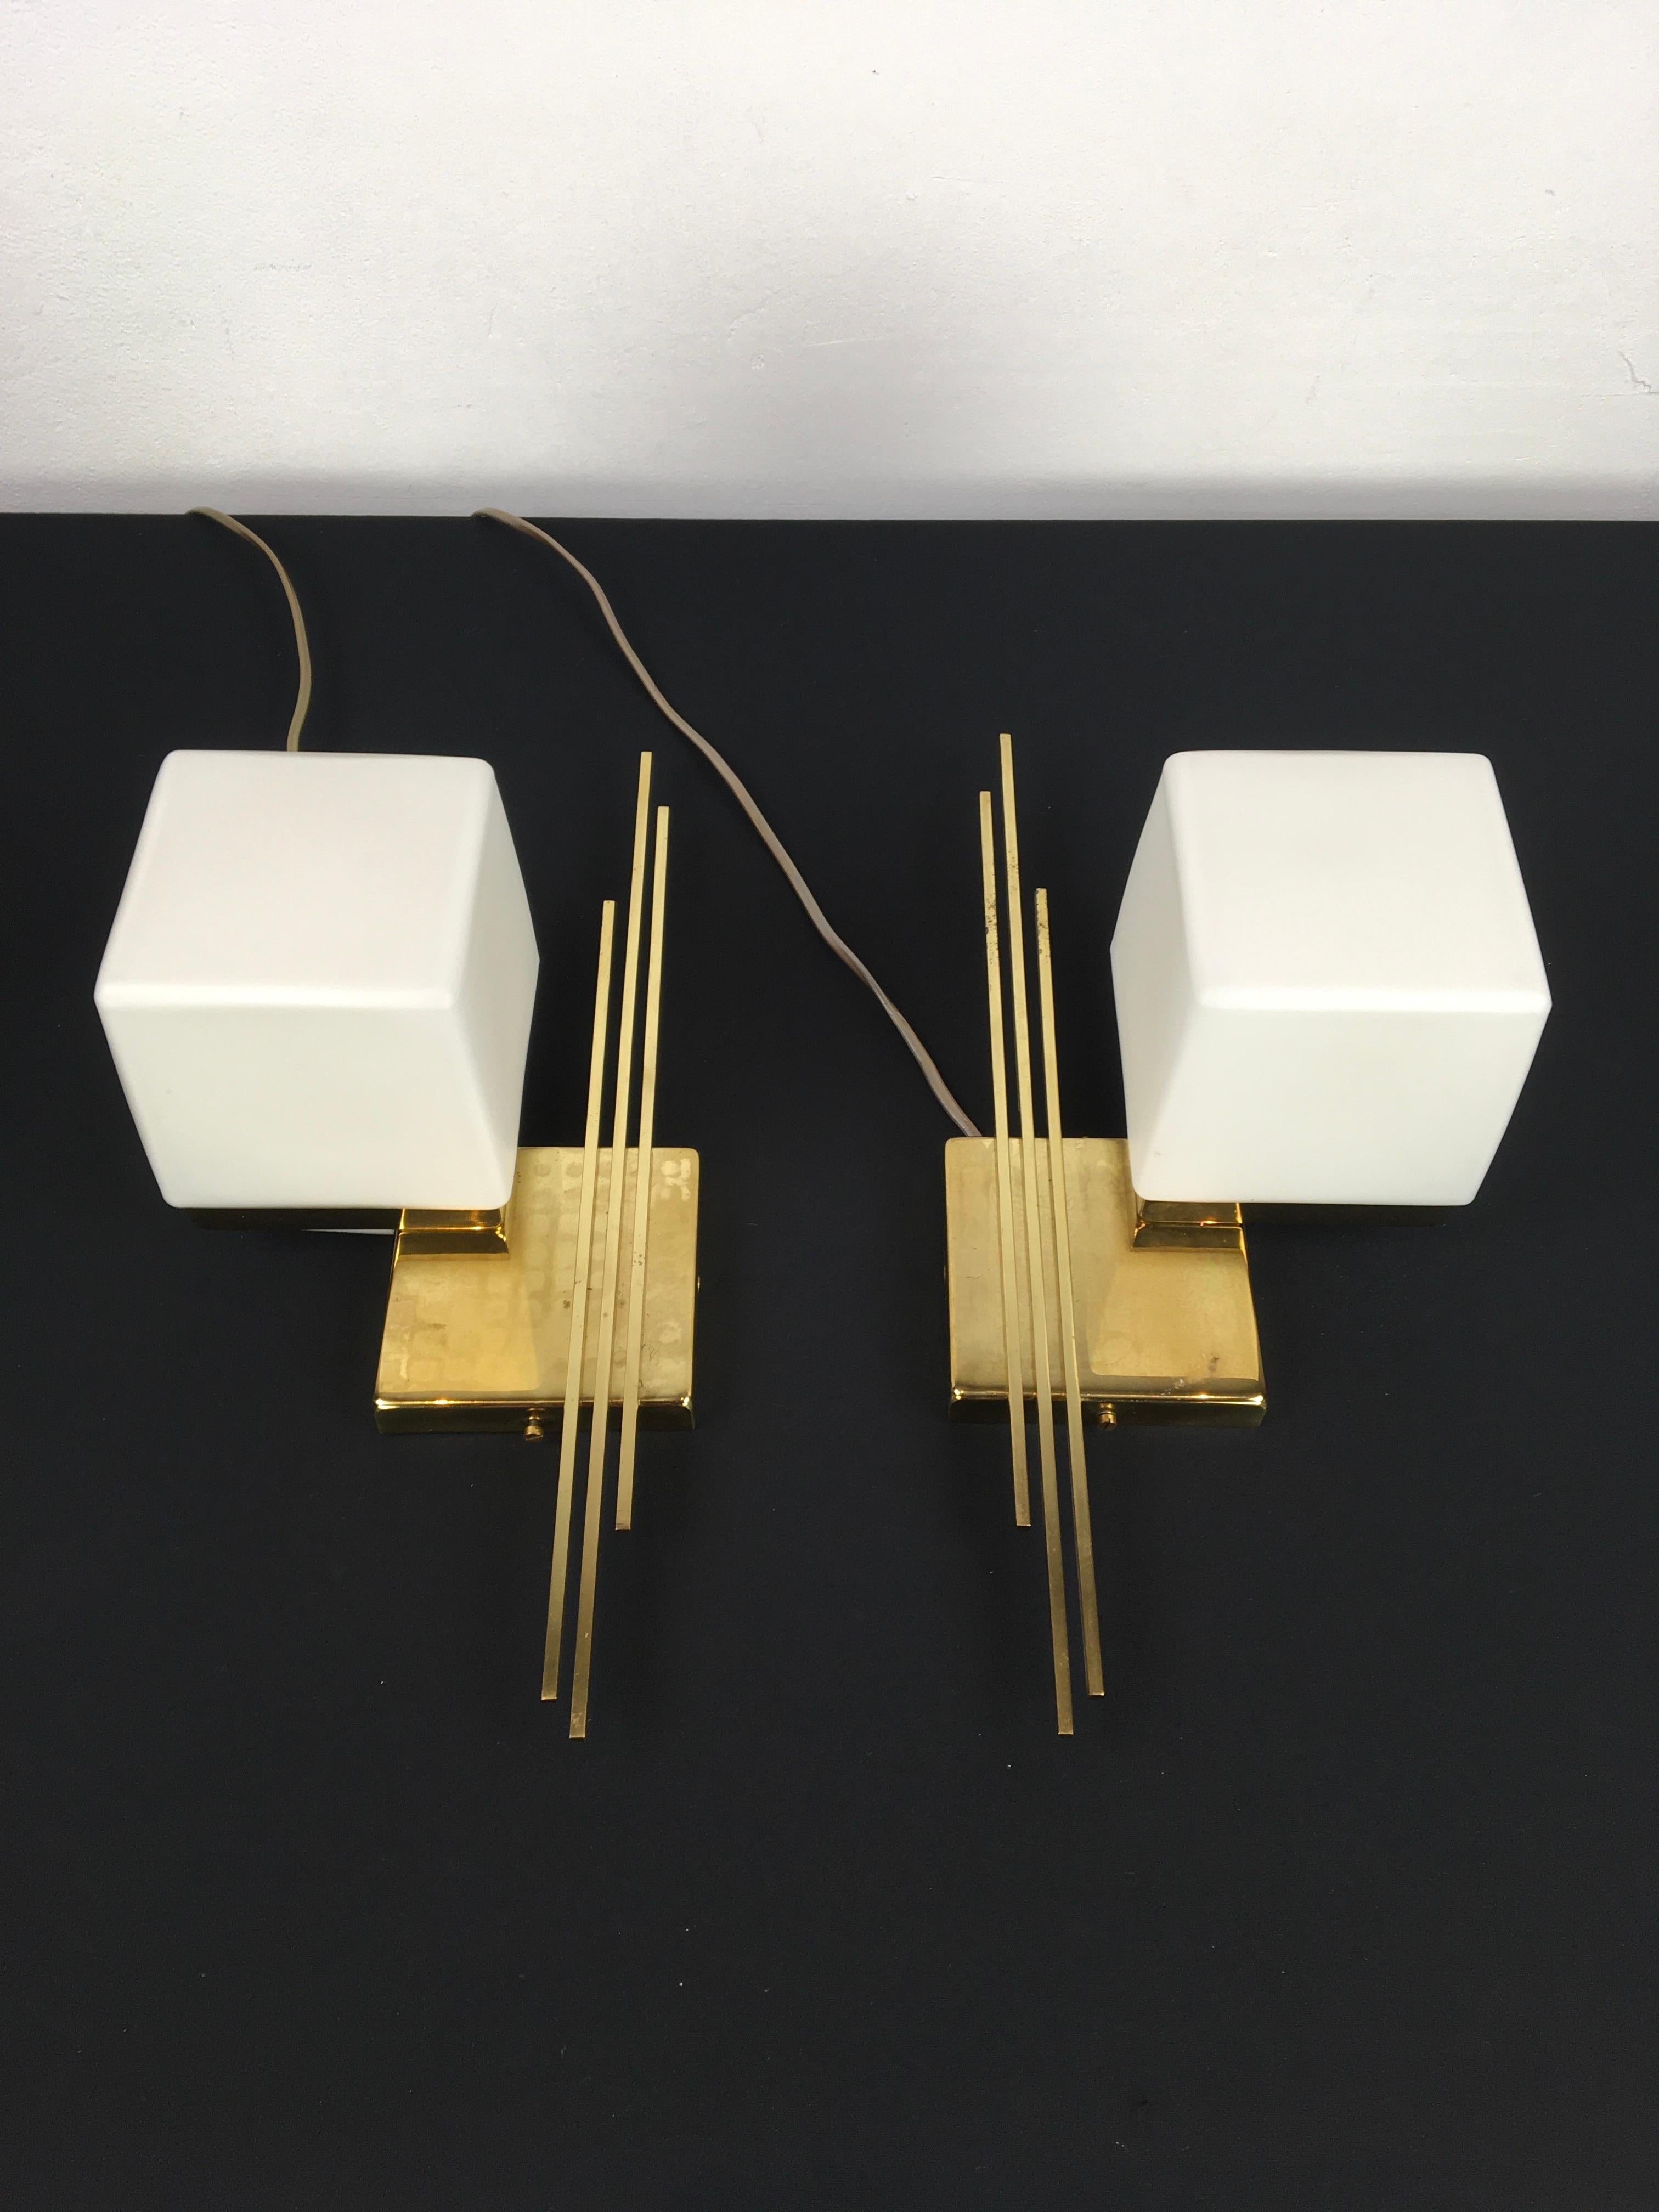 Pair of Sciolari wall lights.
These Sciolari wall scones have a cube shaped base with each 3 lines or stripes
and cube or square milk glass shades. Inside there are white porcelain fittings for E14 fitting.

These lights can be hang in the position